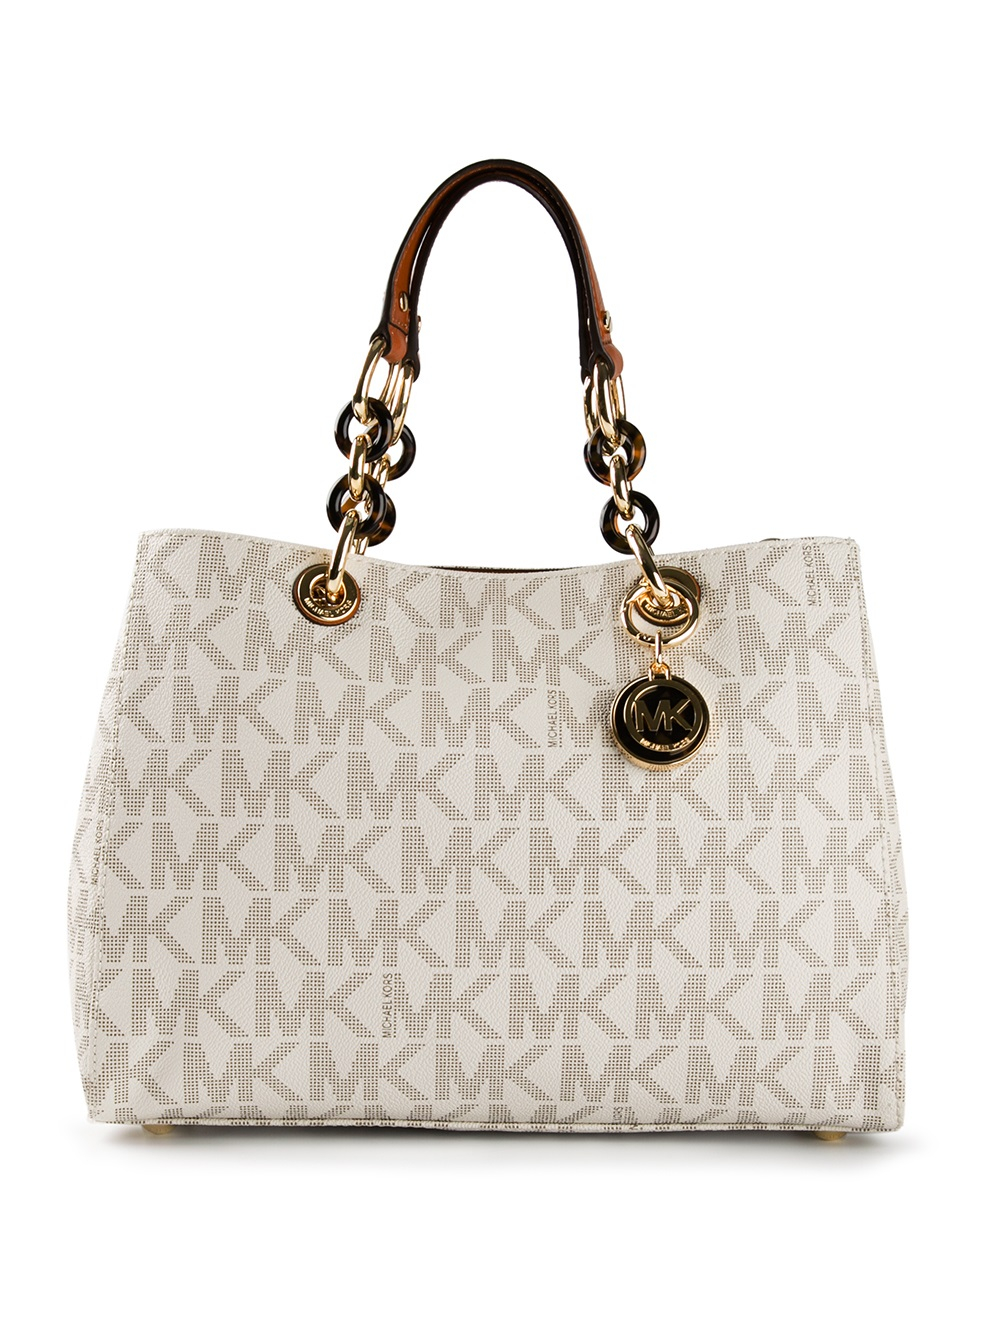 michael kors white bag with gold chain